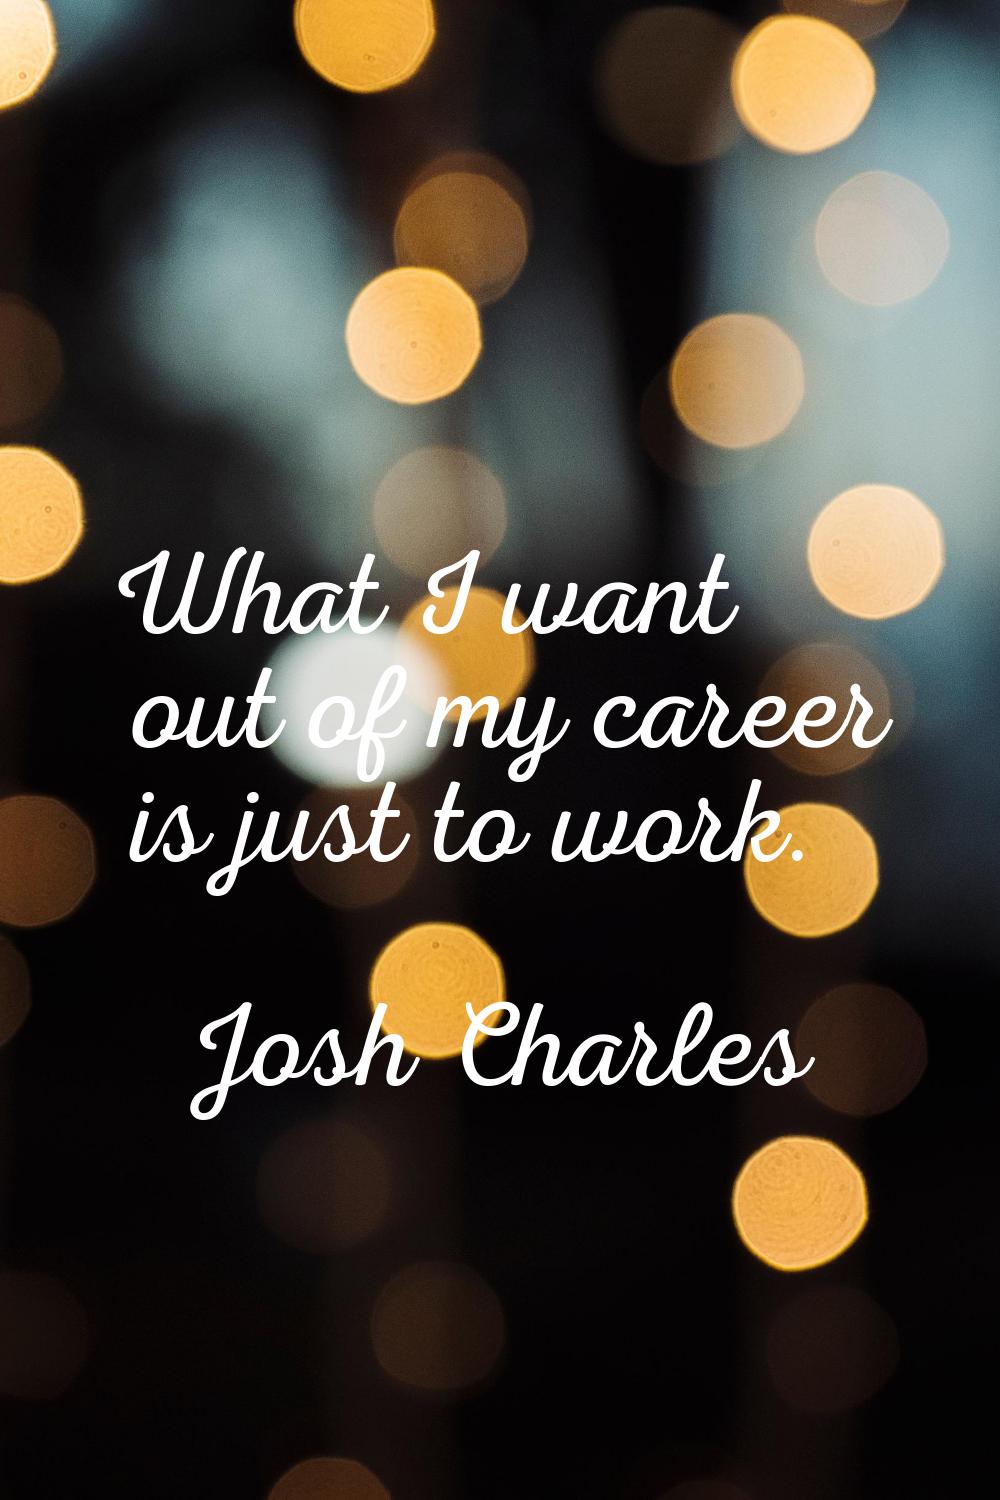 What I want out of my career is just to work.